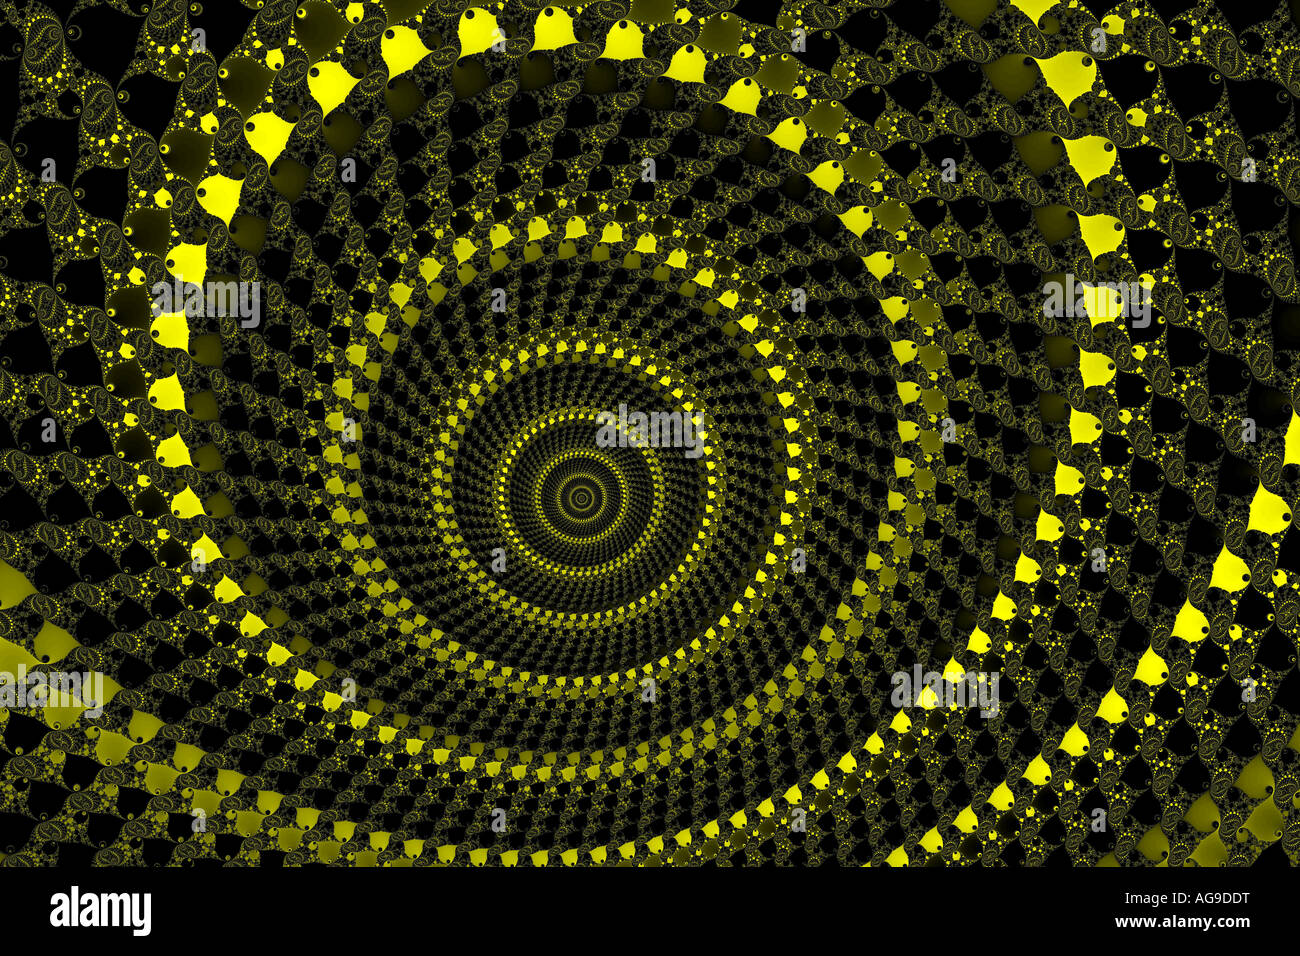 Yellow concentric circles on a black background Stock Photo